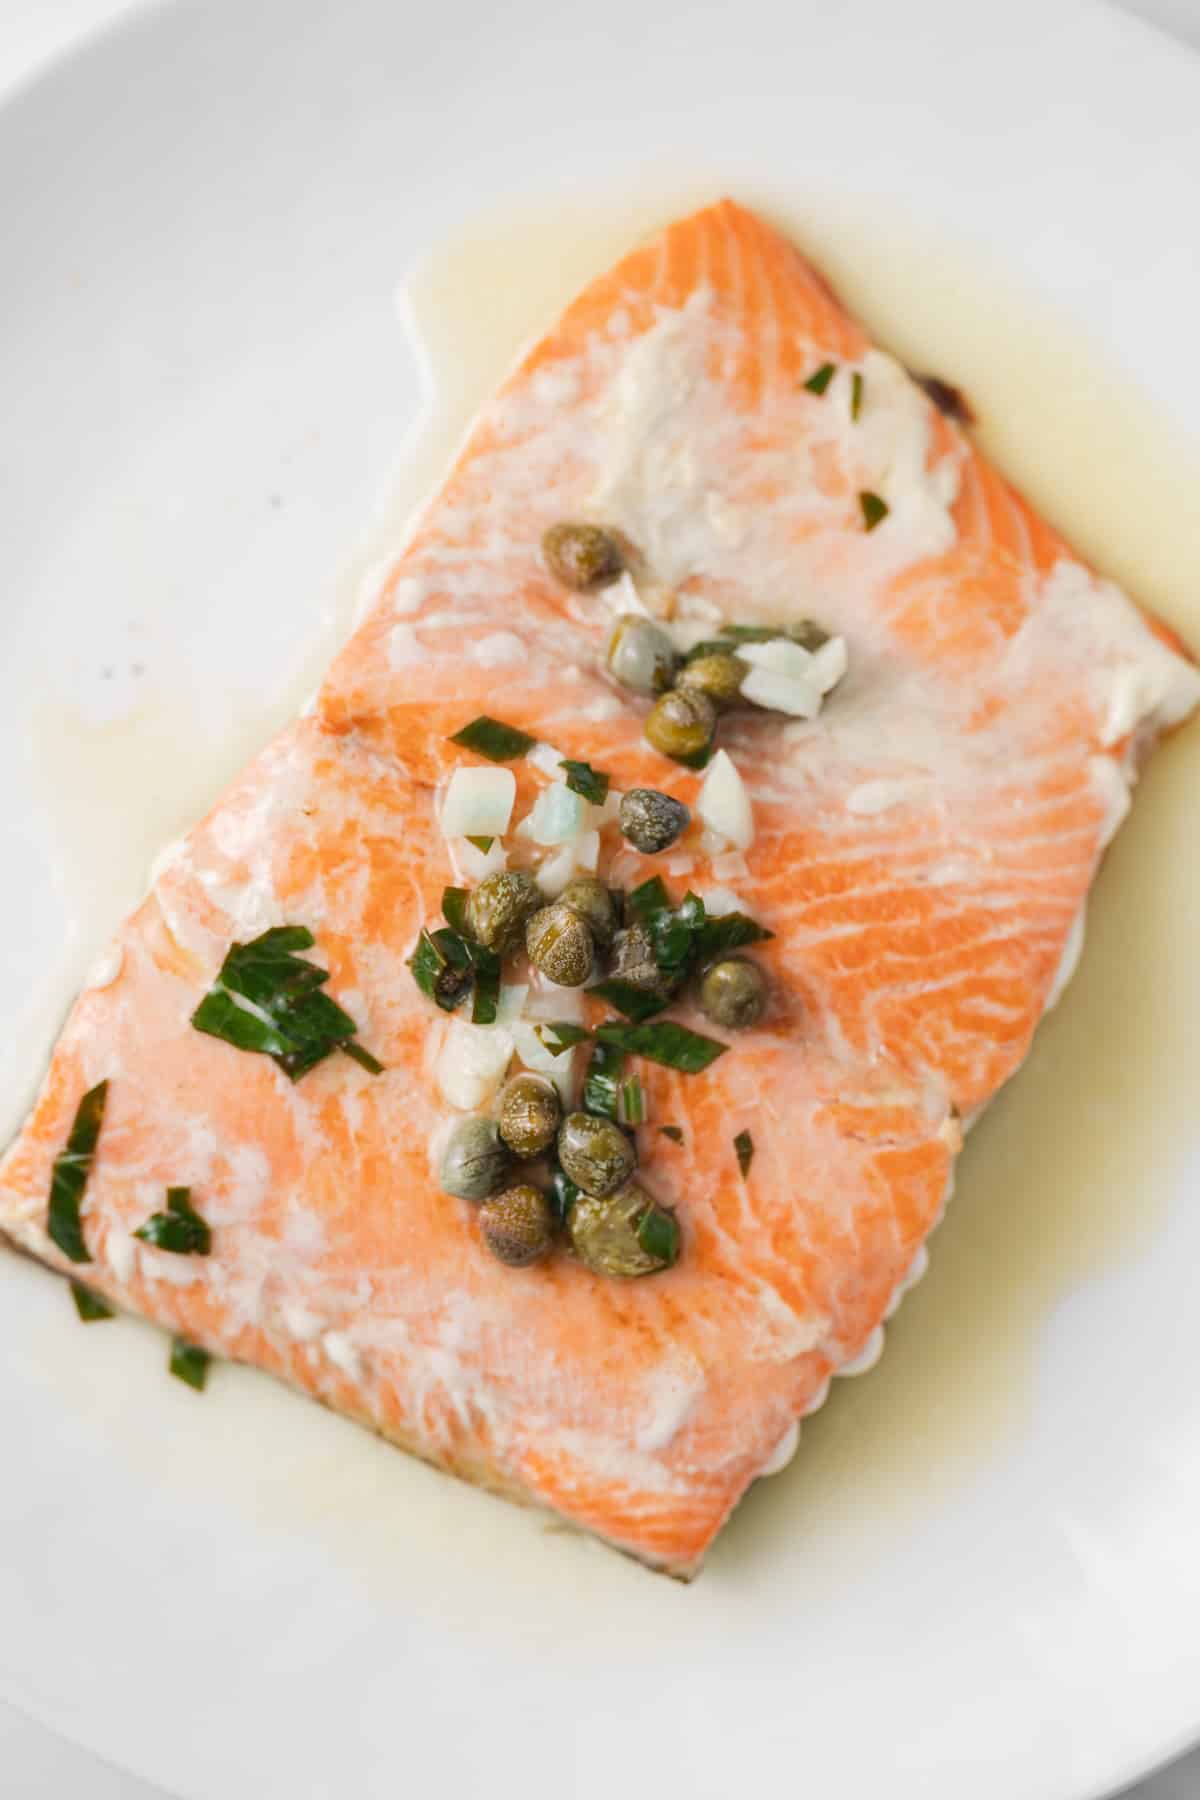 Salmon topped with lemon caper sauce.